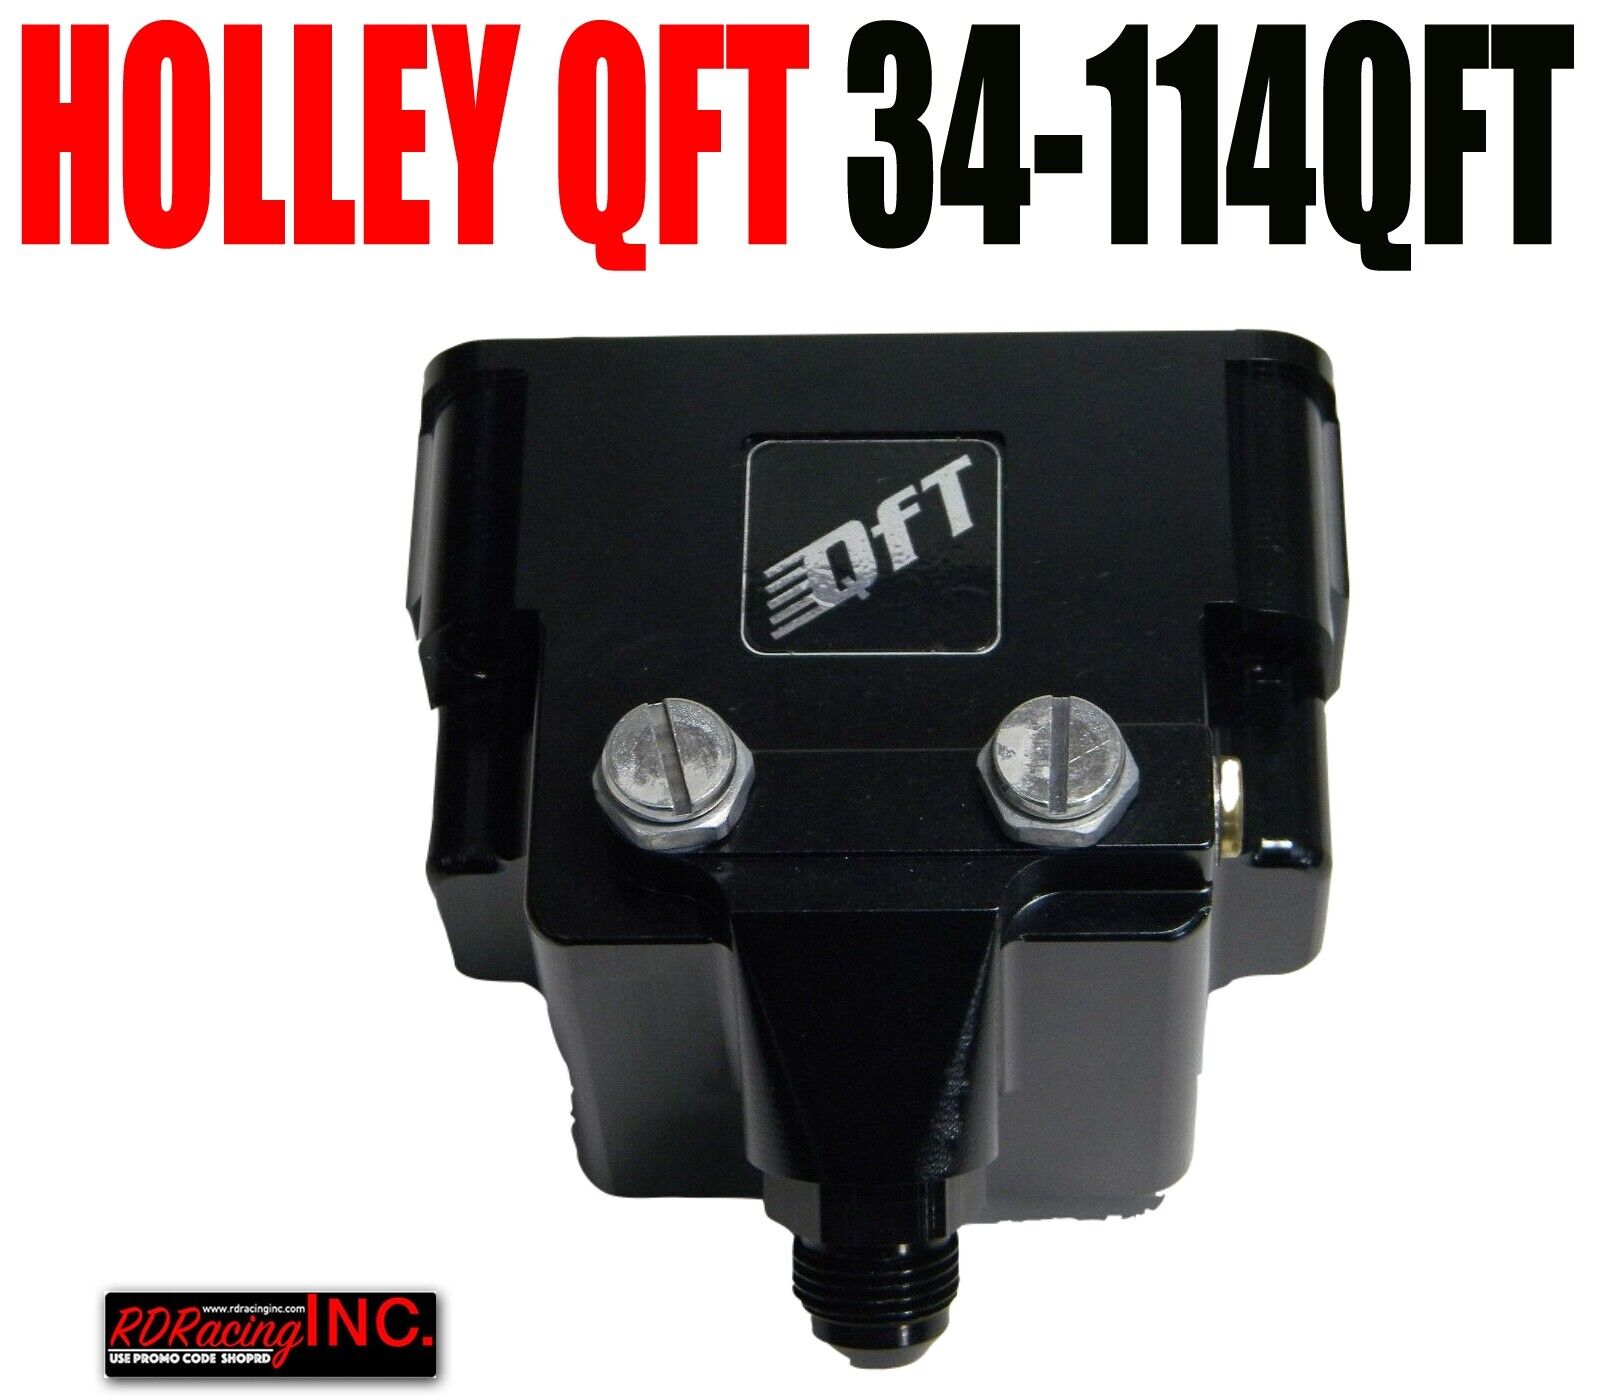 Holley QFT 34-114QFT Single Inlet, Dual Needle & Seat Billet Fuel Bowl Complete